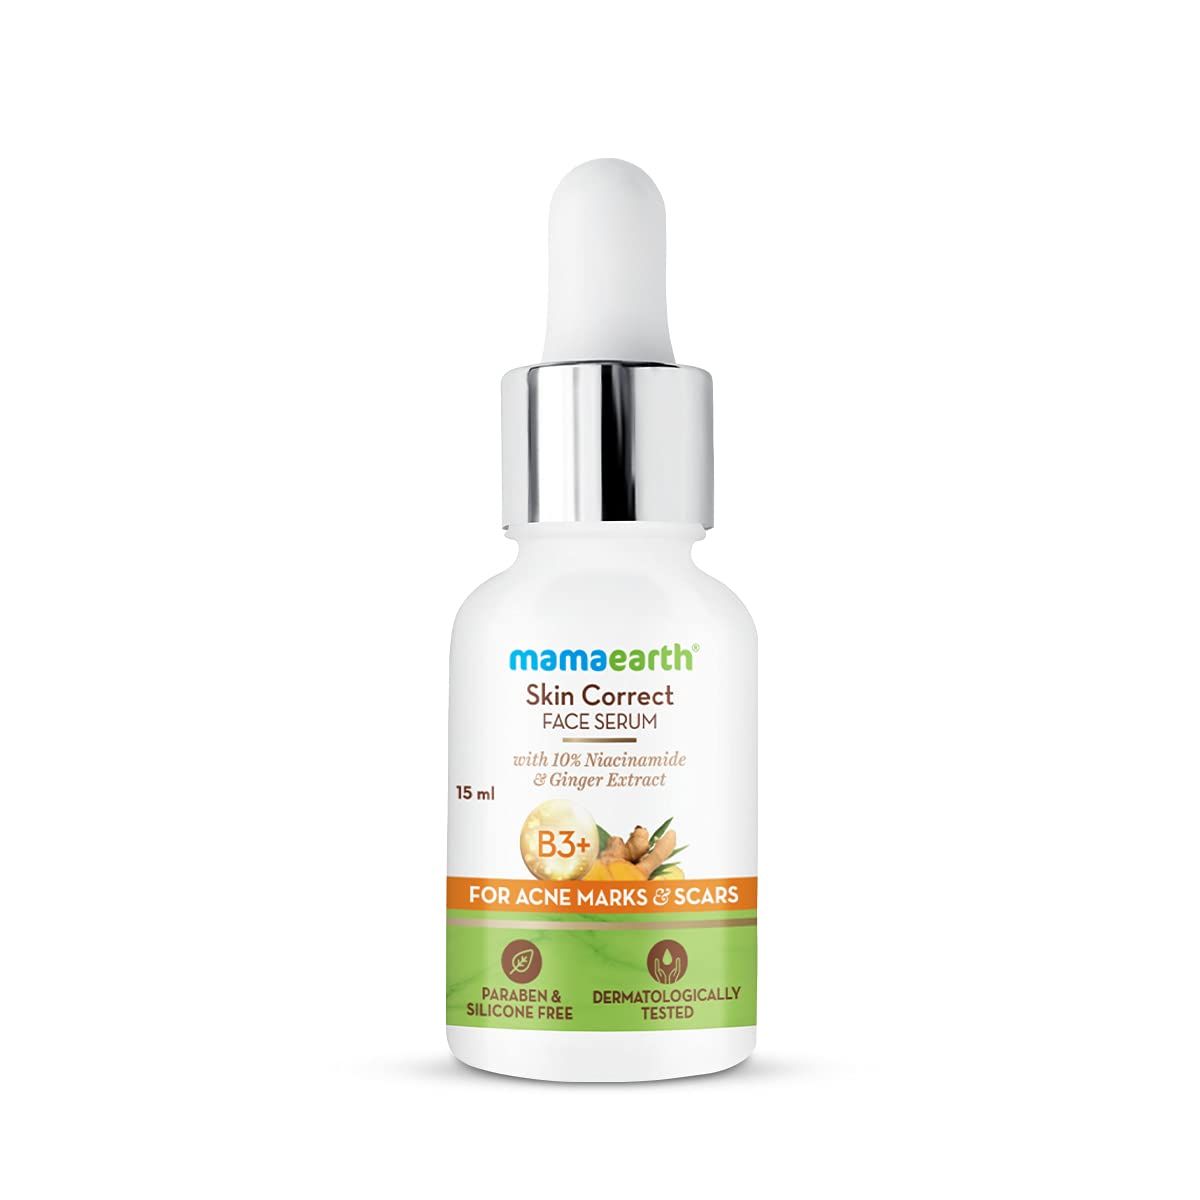 Buy Mamaearth Skin Correct Face Serum with Niacinamide and Ginger Extract for Acne Marks & Scars - 15 ml - Purplle